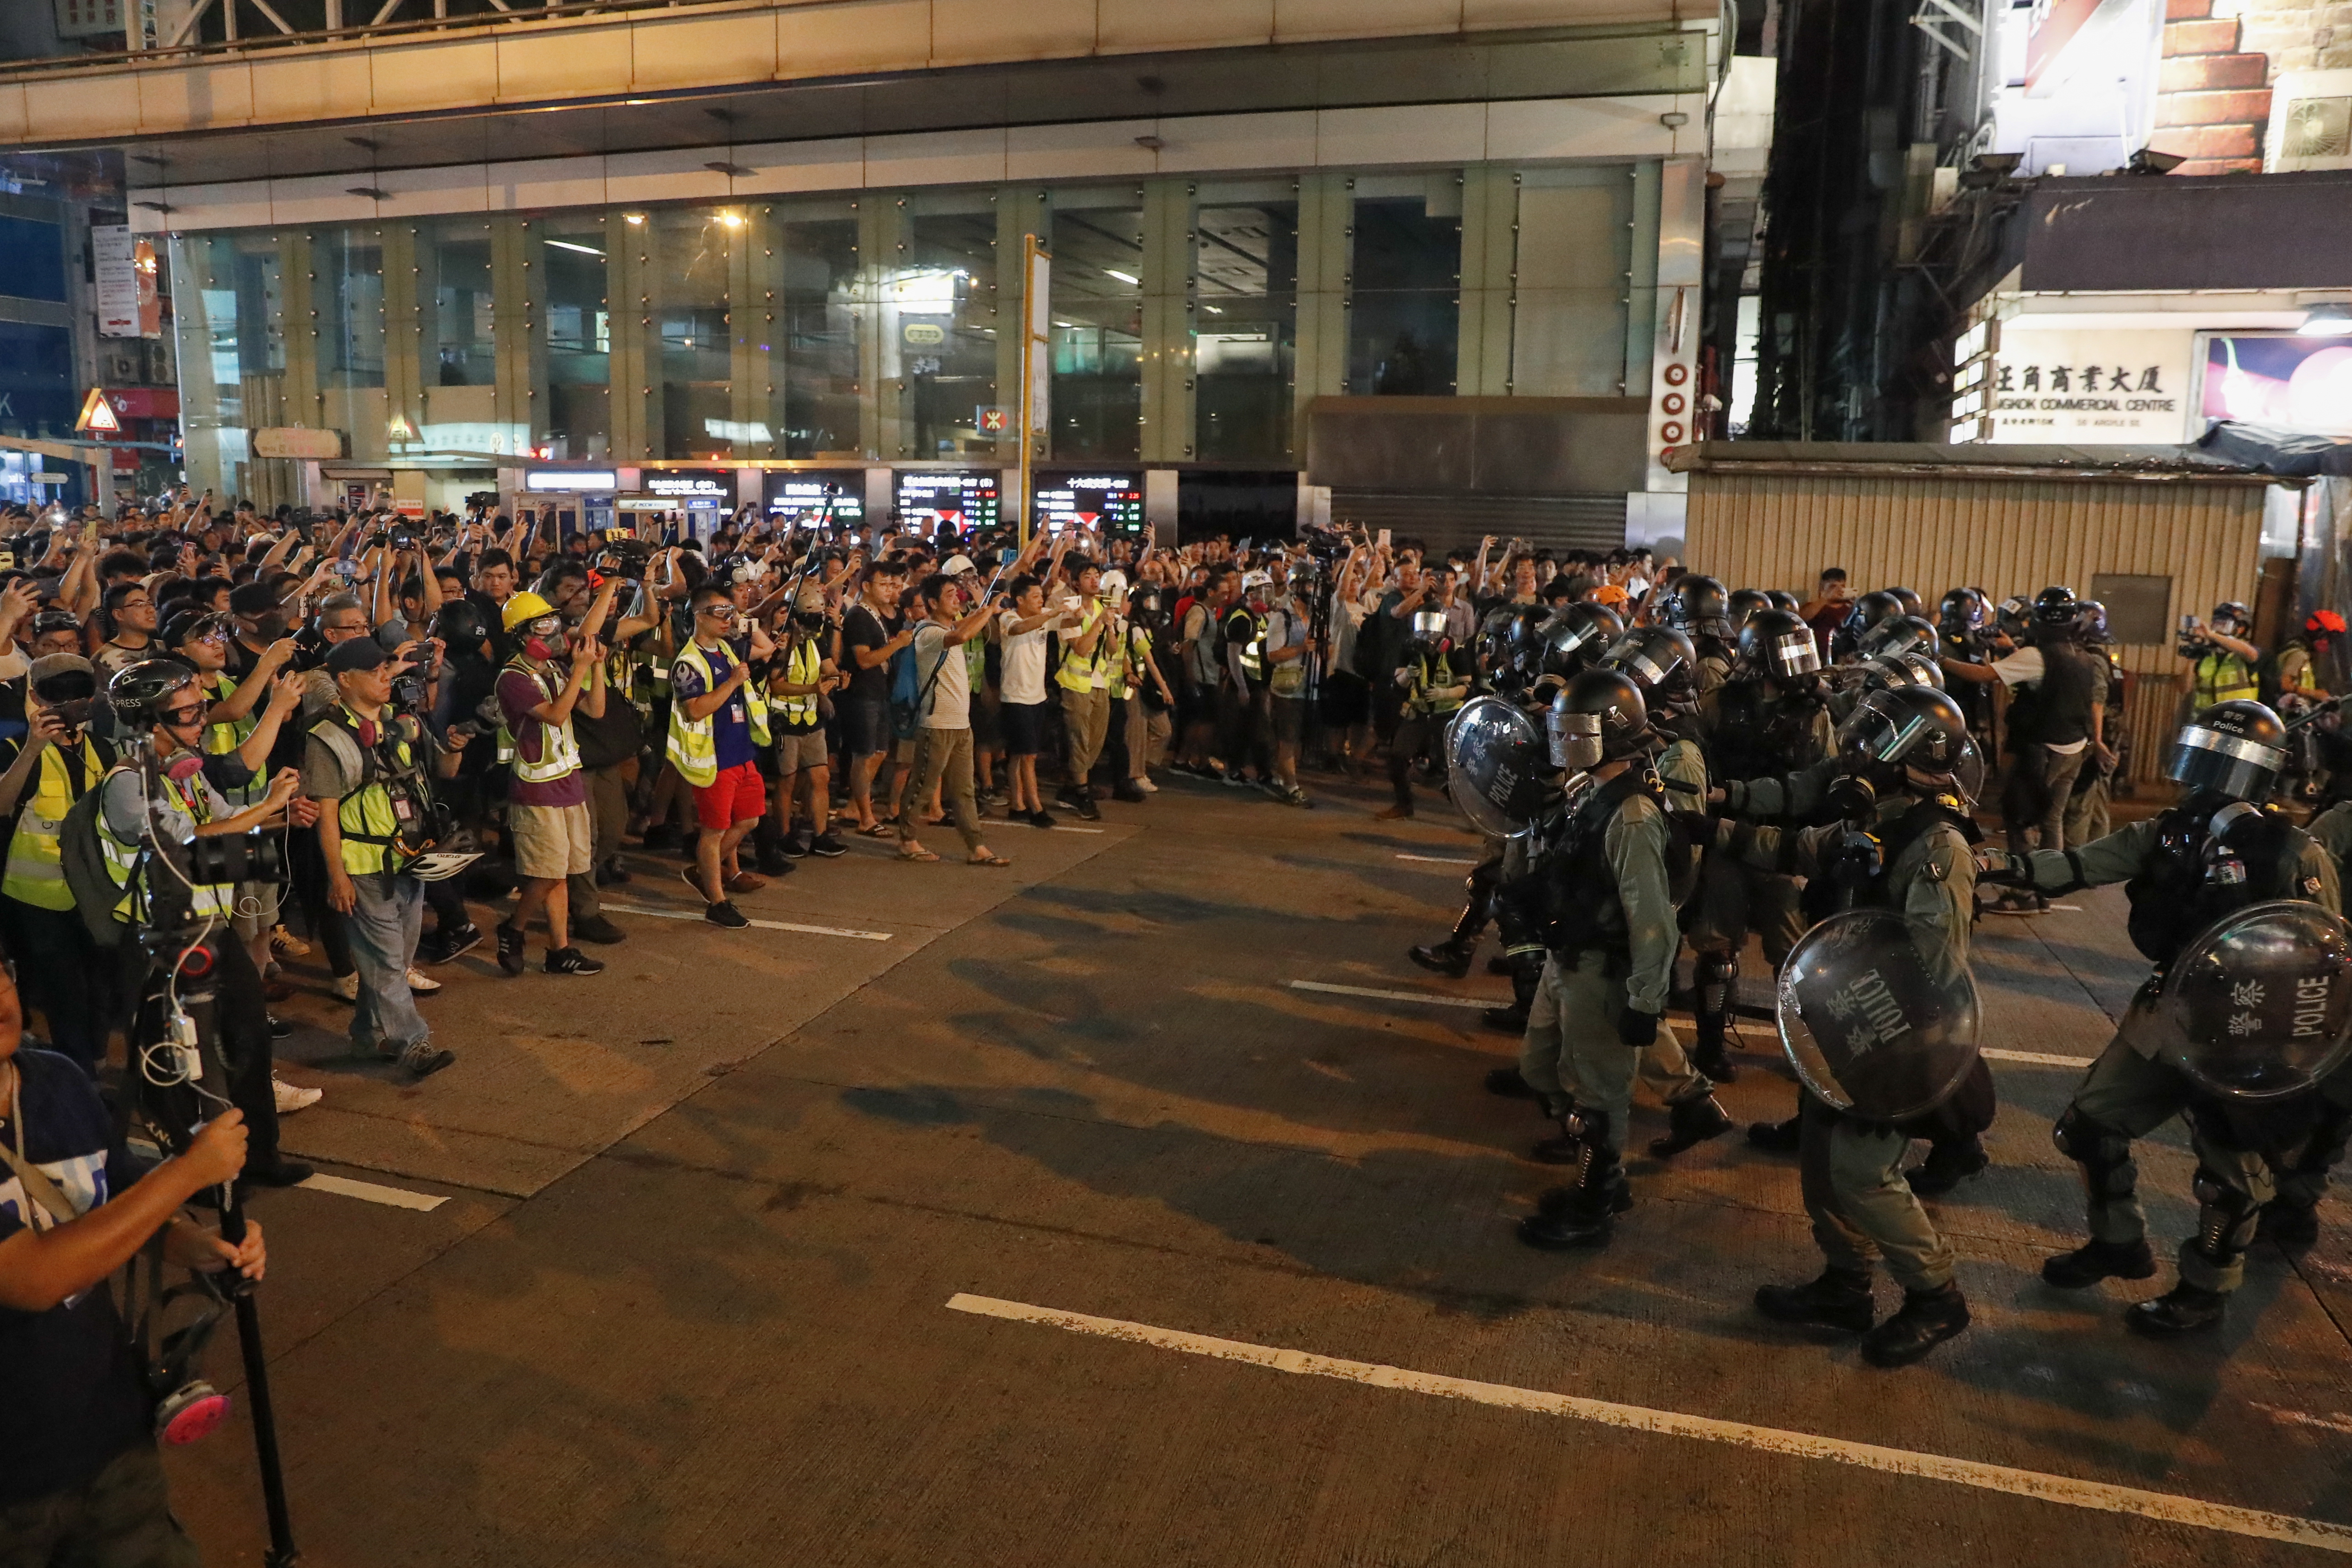 epa07823011 Riot police advance to disperse protesters attending a rally against police's violence at Mong Kok, in Hong Kong, China, 06 September 2019. Hong Kong Chief Executive Carrie Lam announced on 05 September the withdrawal of a controversial extradition bill that could allow the transfer of criminal suspects to mainland China after three months of protests across the territory. The full withdrawal of the bill, which was introduced in April and then suspended in June, is one of five key demands of protesters, who are demanding for full democratic rights.  EPA/JEON HEON-KYUN